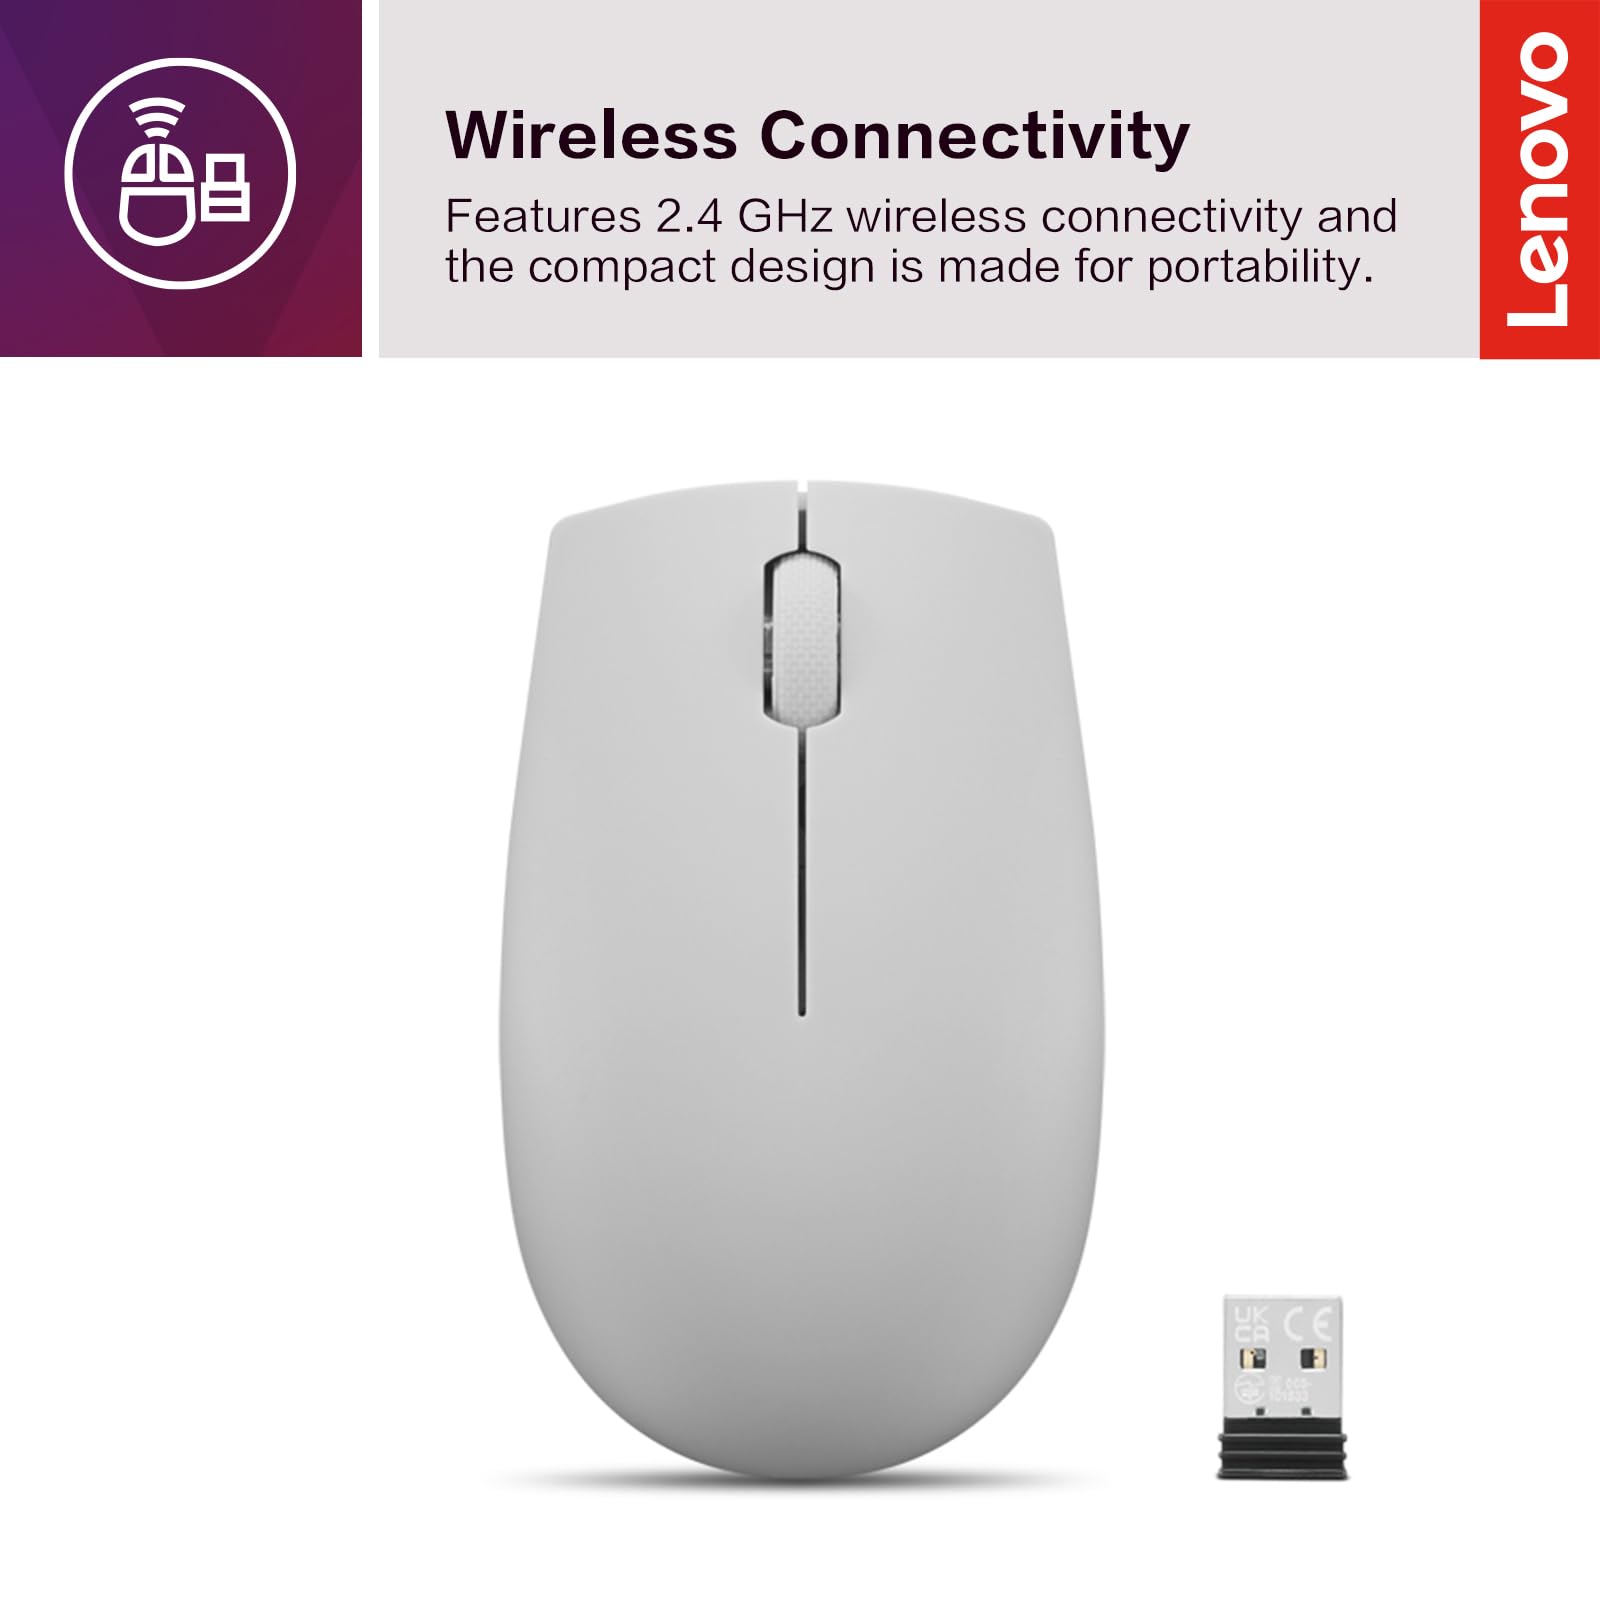 Lenovo 300 Wireless Mouse – Computer Mouse for PC, Laptop with Windows – Ambidextrous Design – 2.4 GHz Nano USB Receiver – 12 Month Battery Life